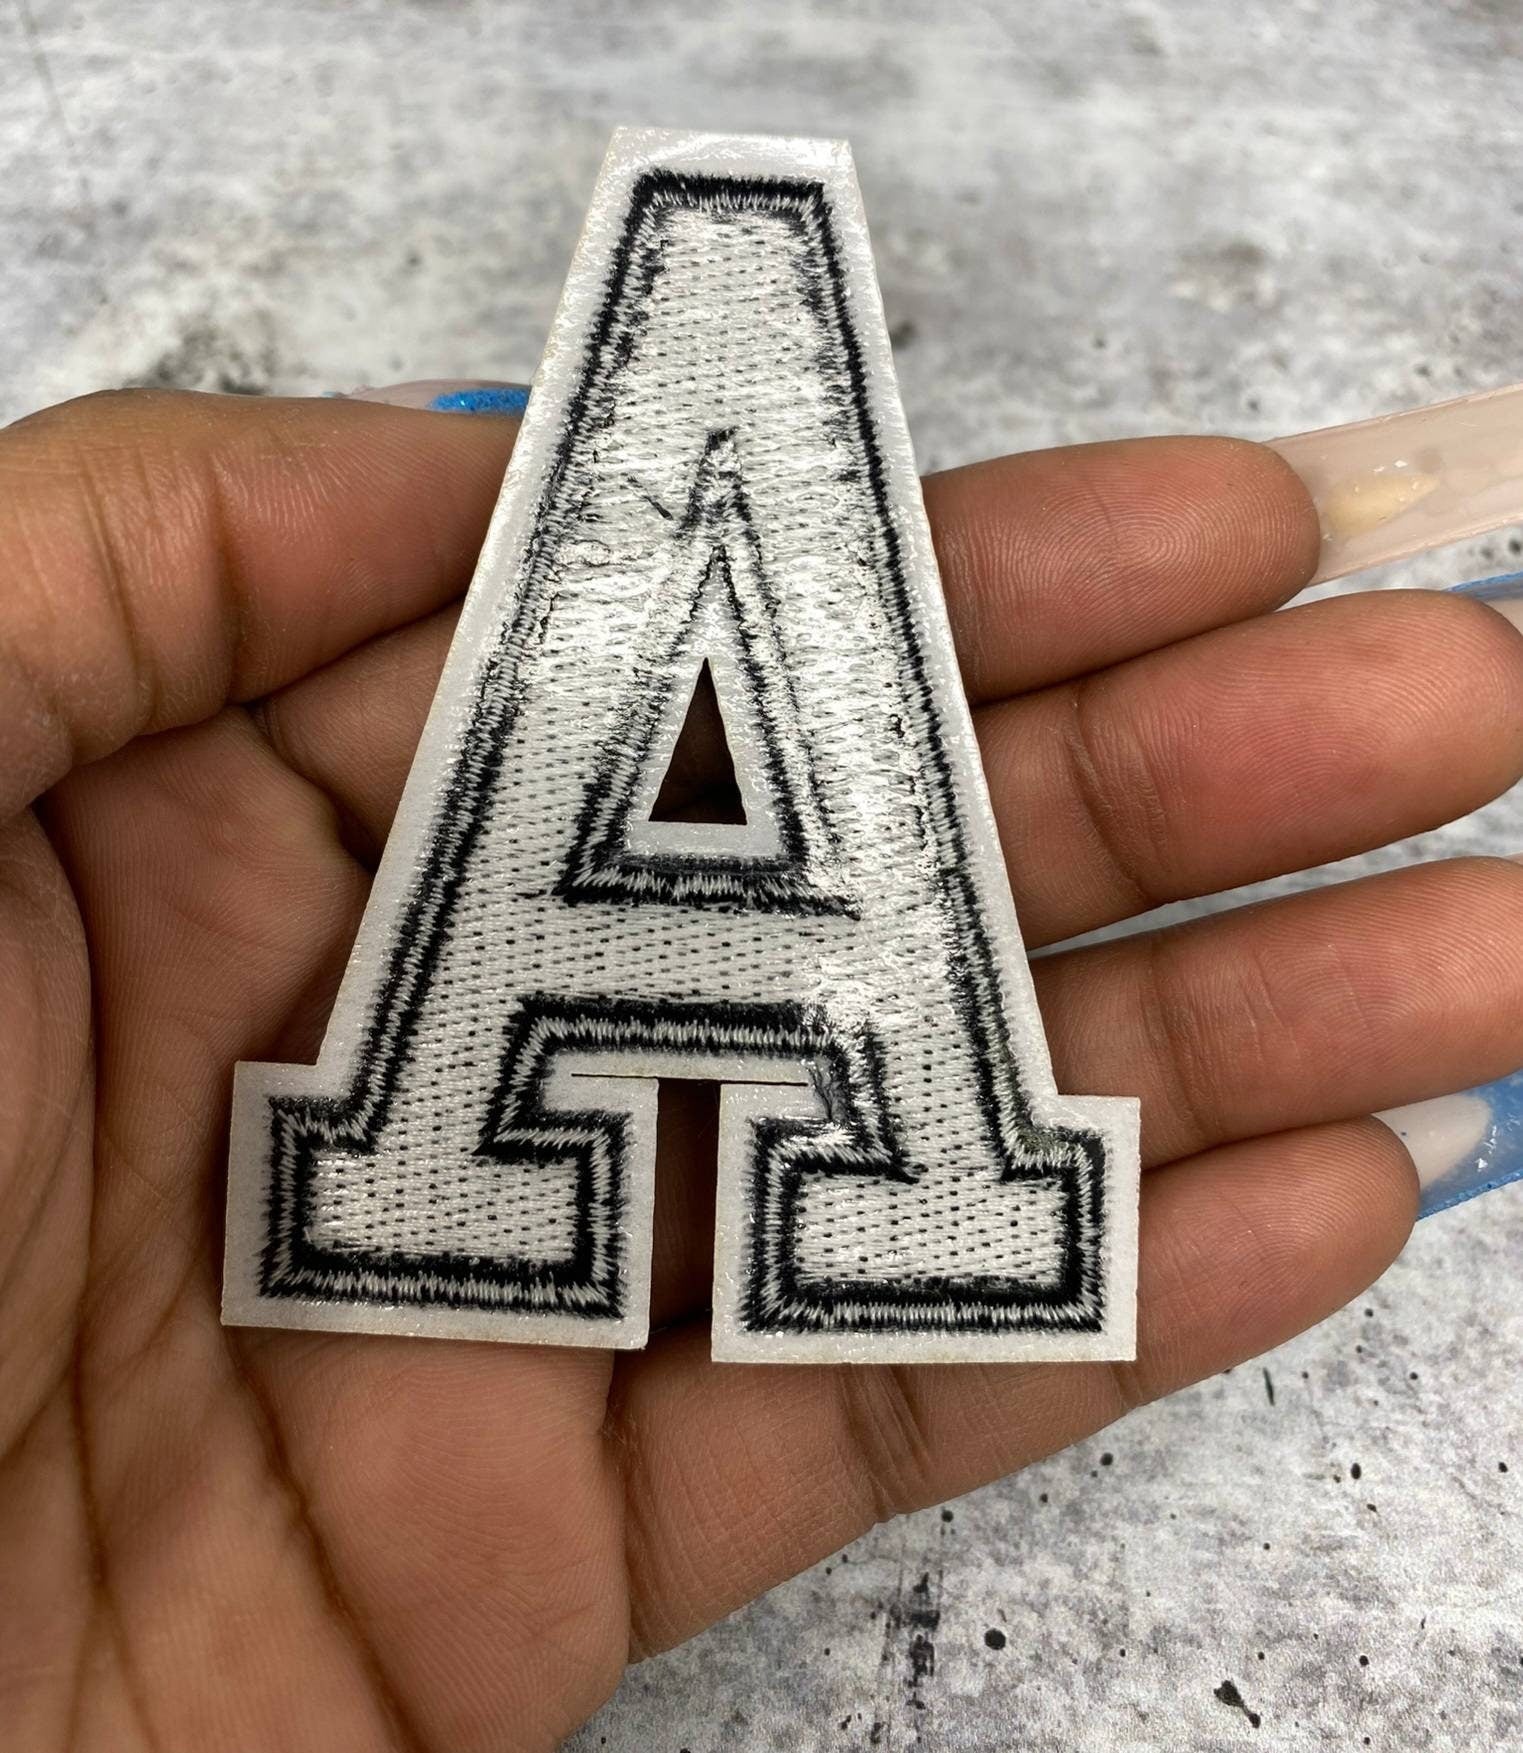 New, "BLK/White" 3" Embroidered Letter w/Felt, Varsity Letter Patch, 1-pc, Iron-on Backing, Choose Your Letter, A-Z Letters, DIY Letters,